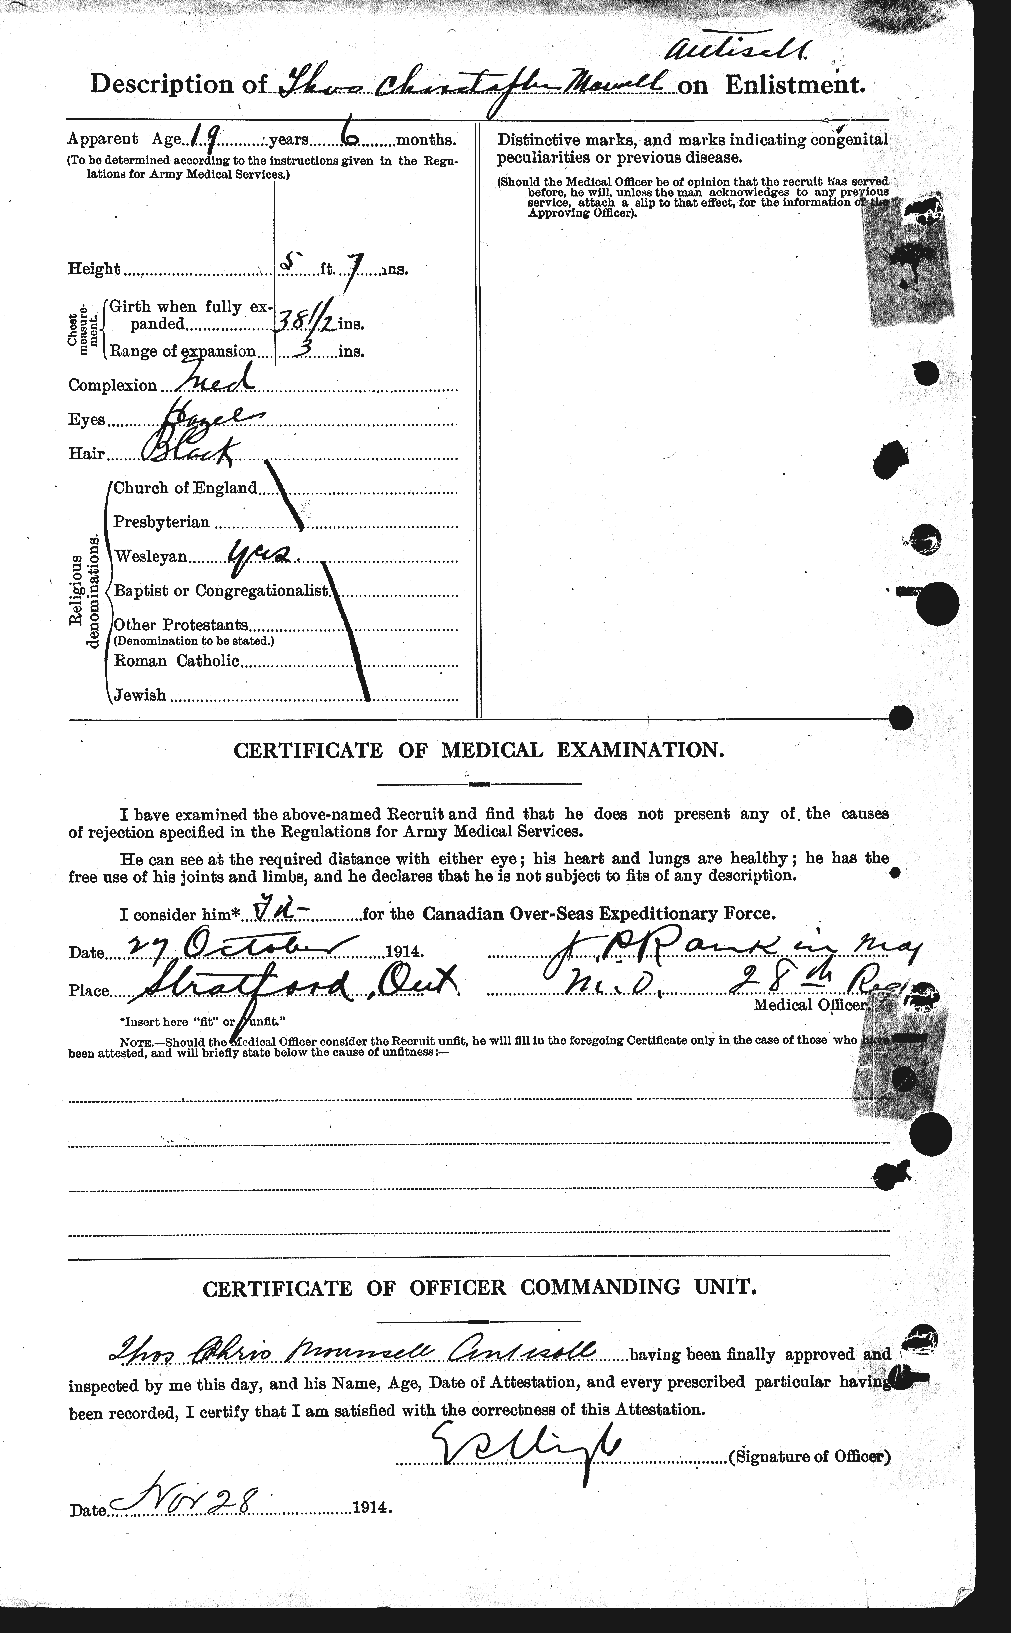 Personnel Records of the First World War - CEF 212131b